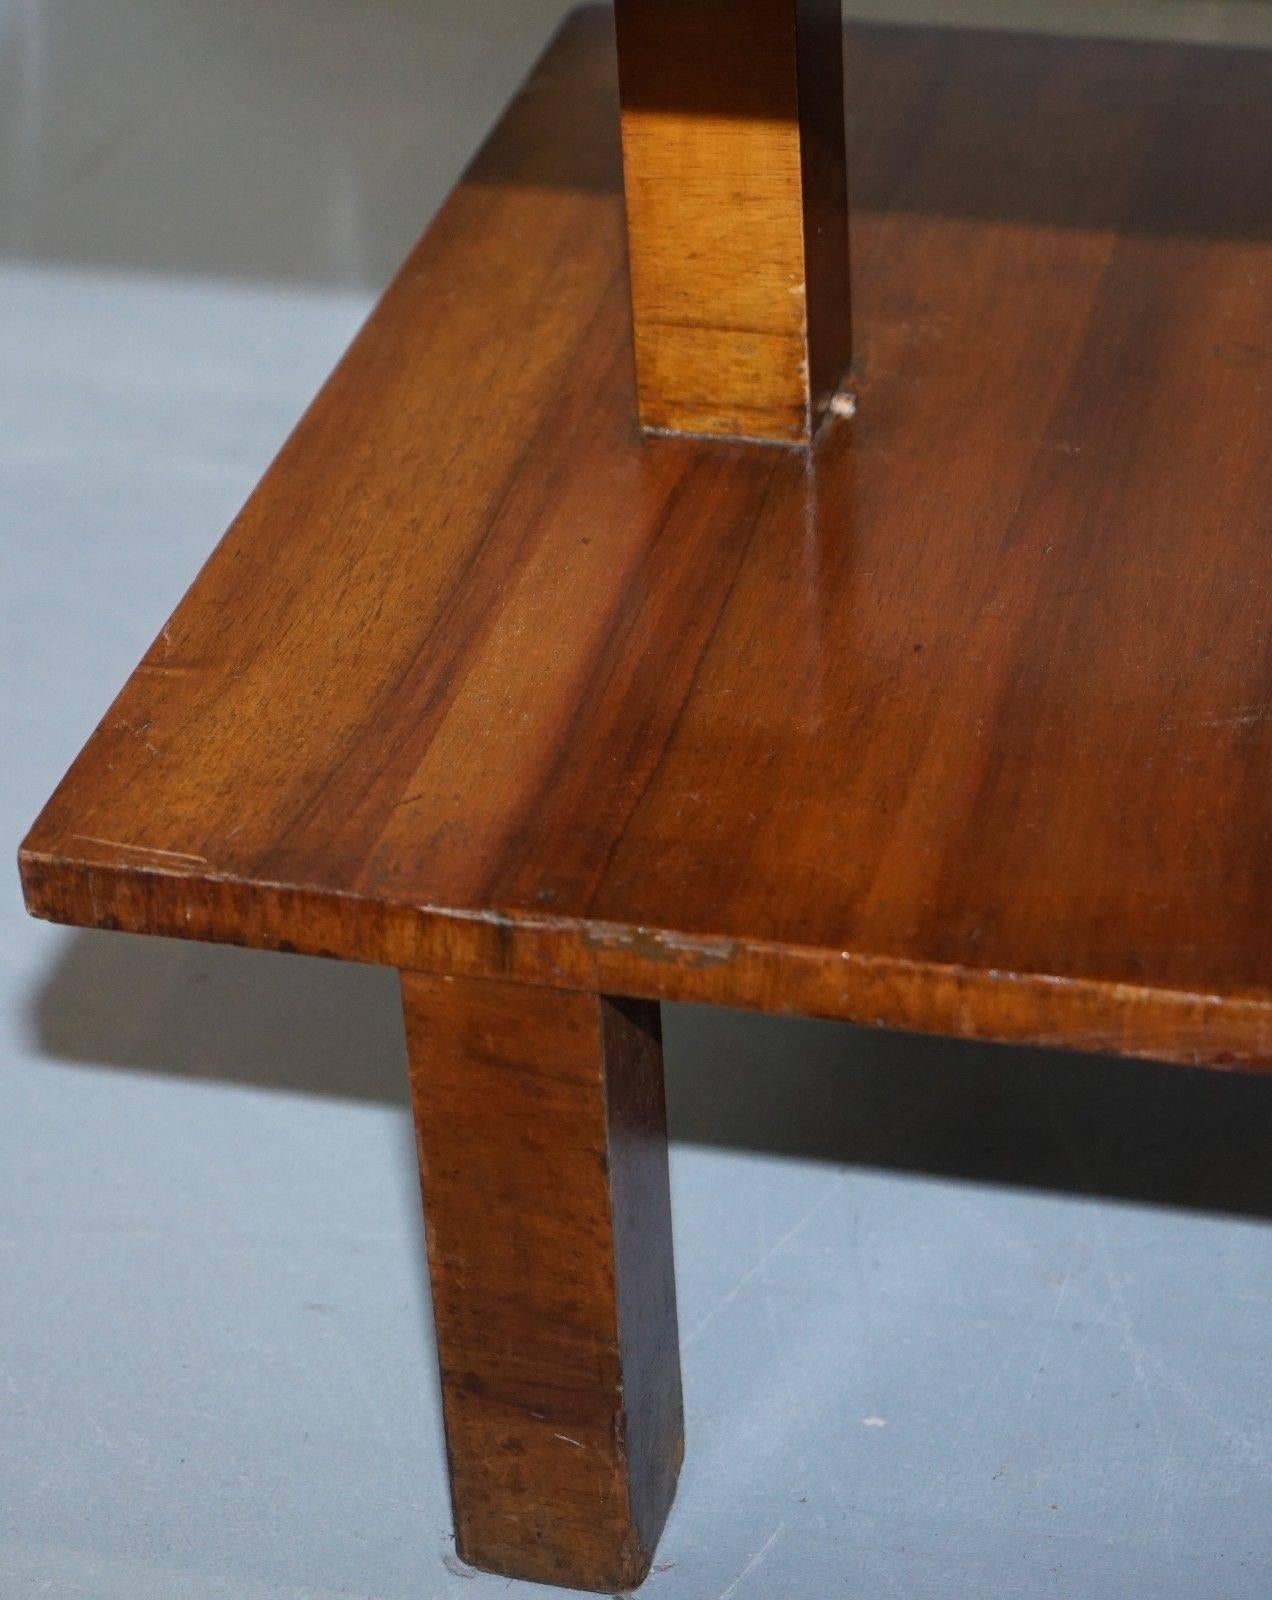 Hand-Crafted Very Rare Walnut Art Deco Large Side Table with Built in Height Adjustable Light For Sale